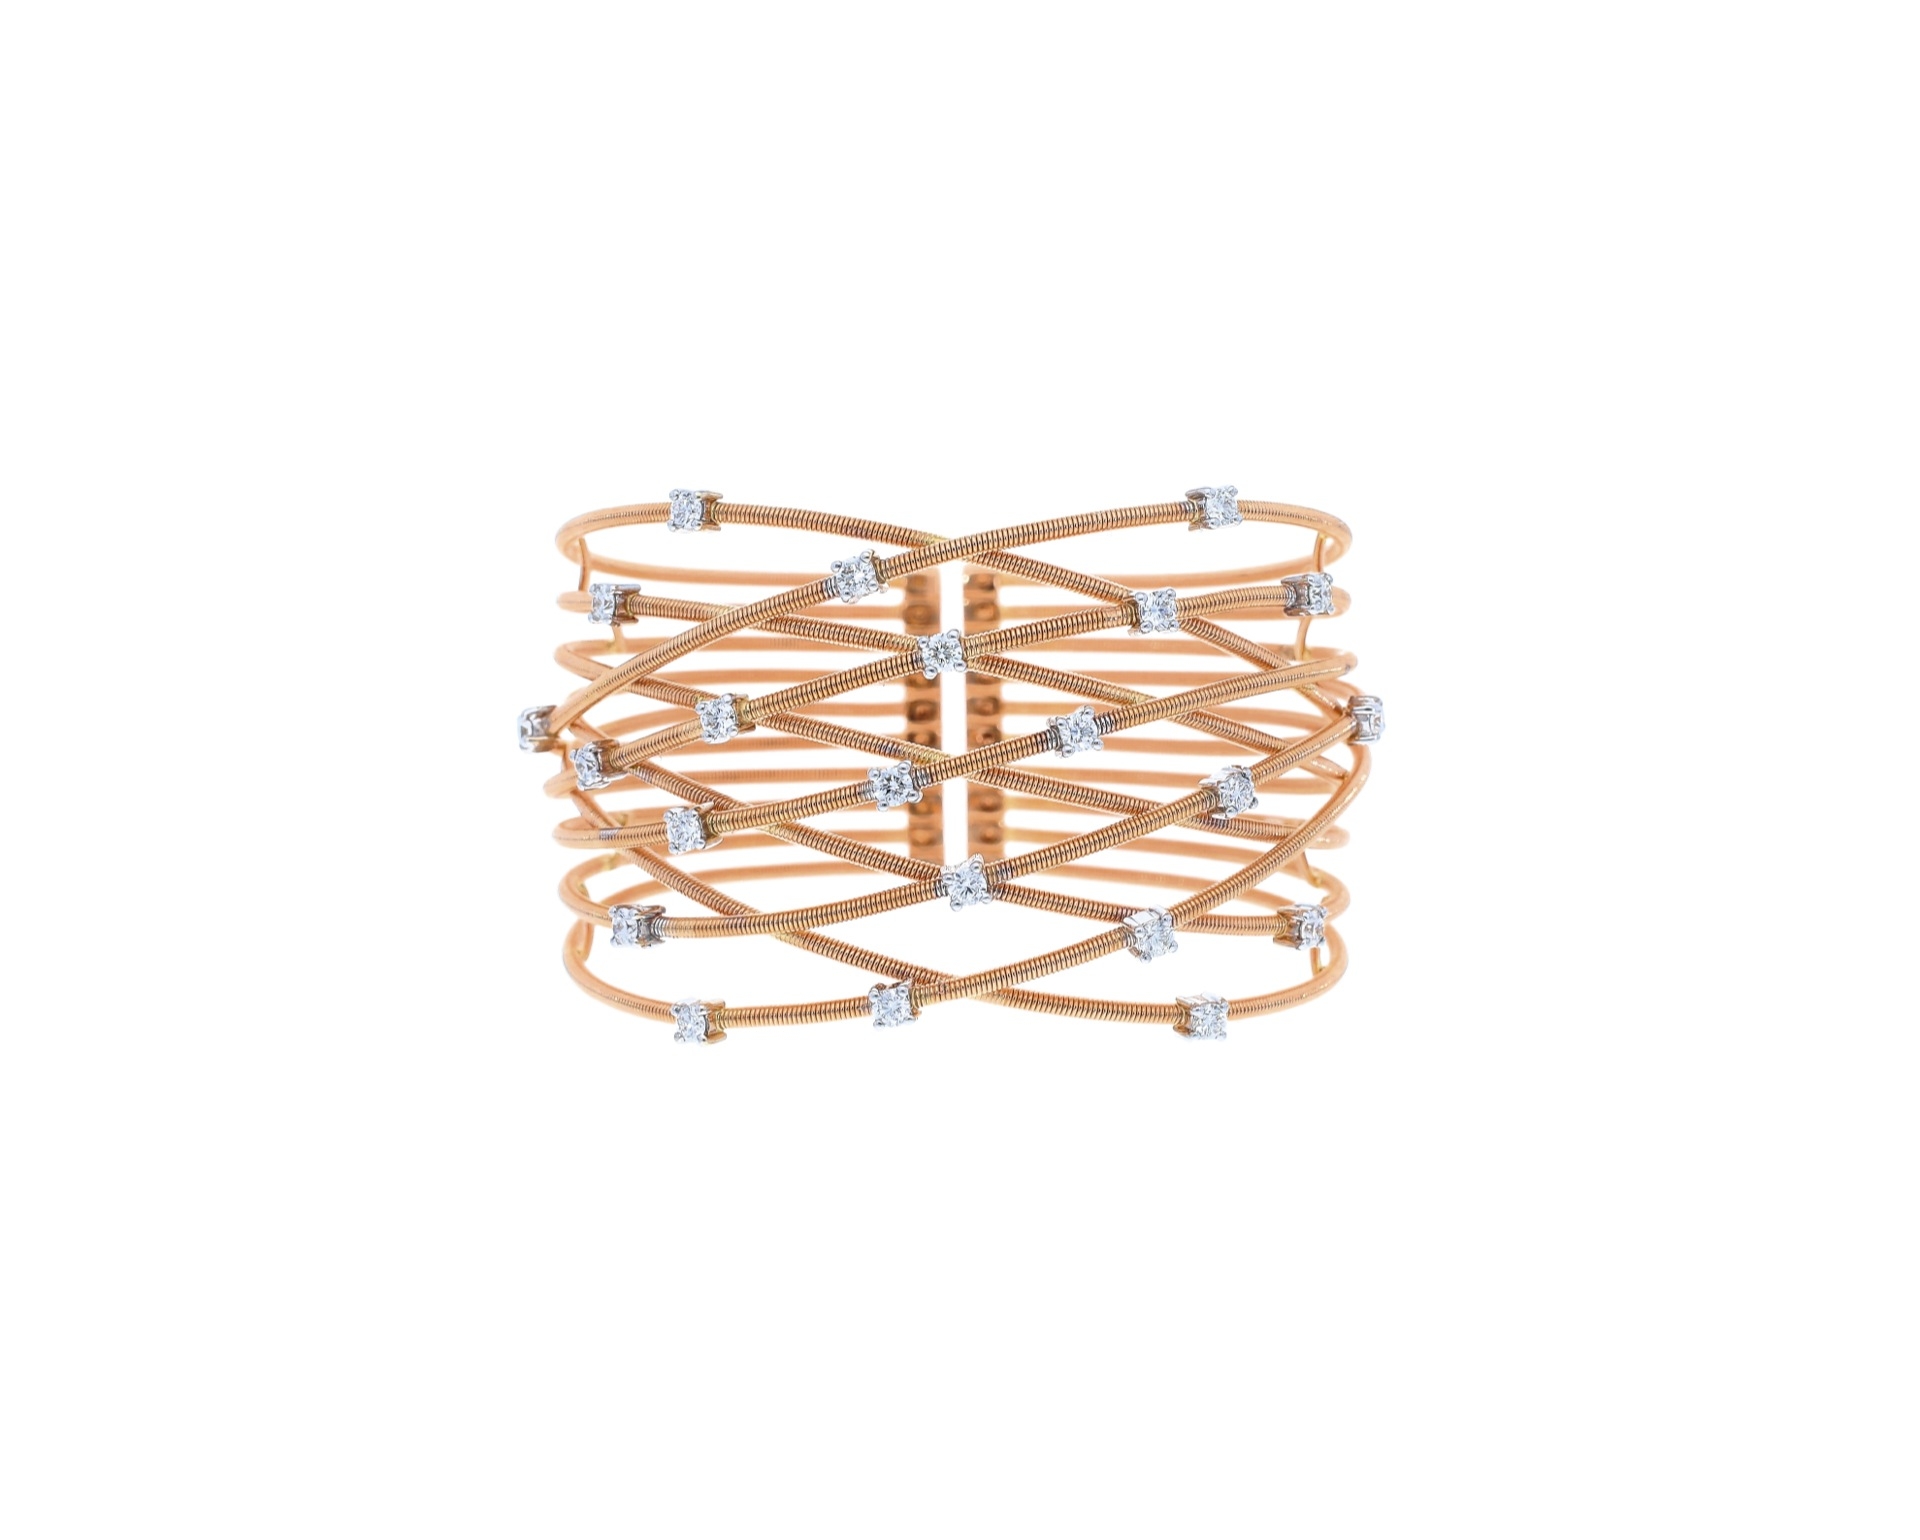 criss cross twisted cable-inspired, diamond bracelet in 18kt rose and white gold